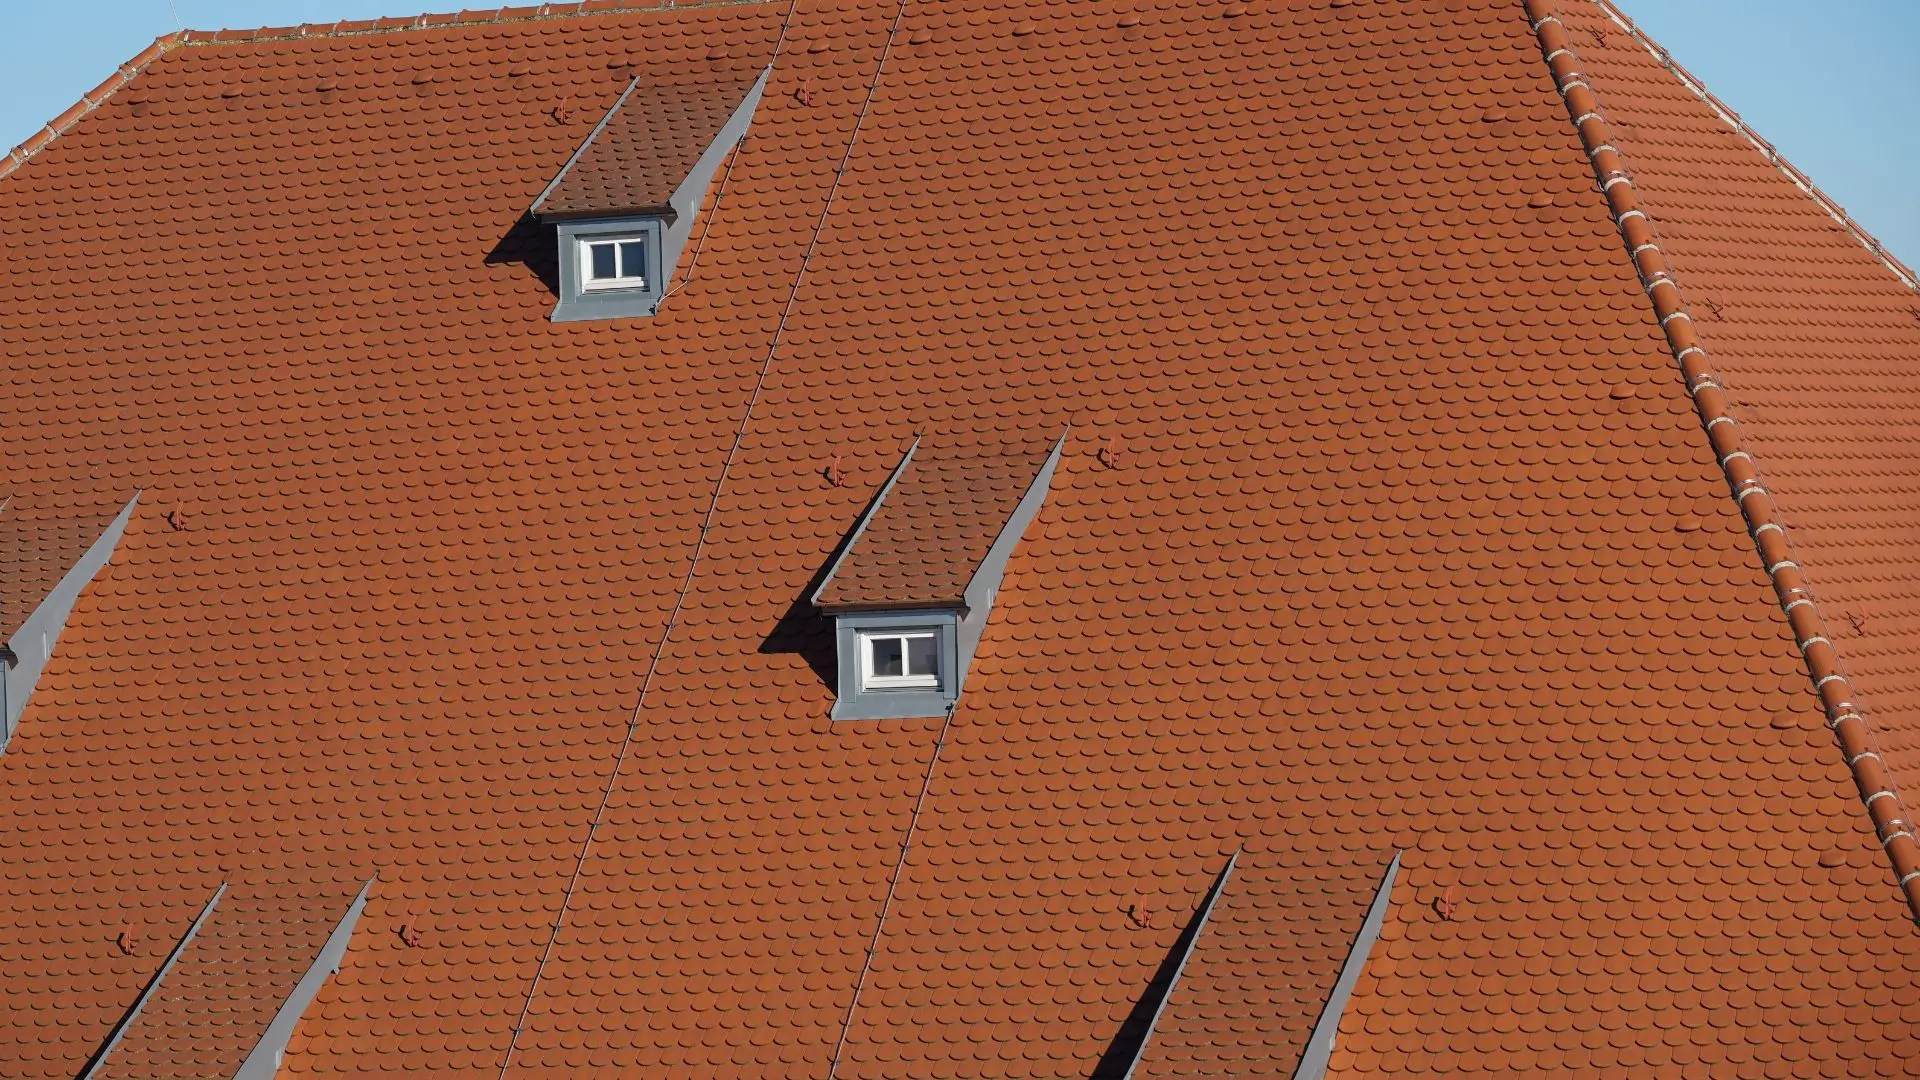 What factors affect the durability of roofs